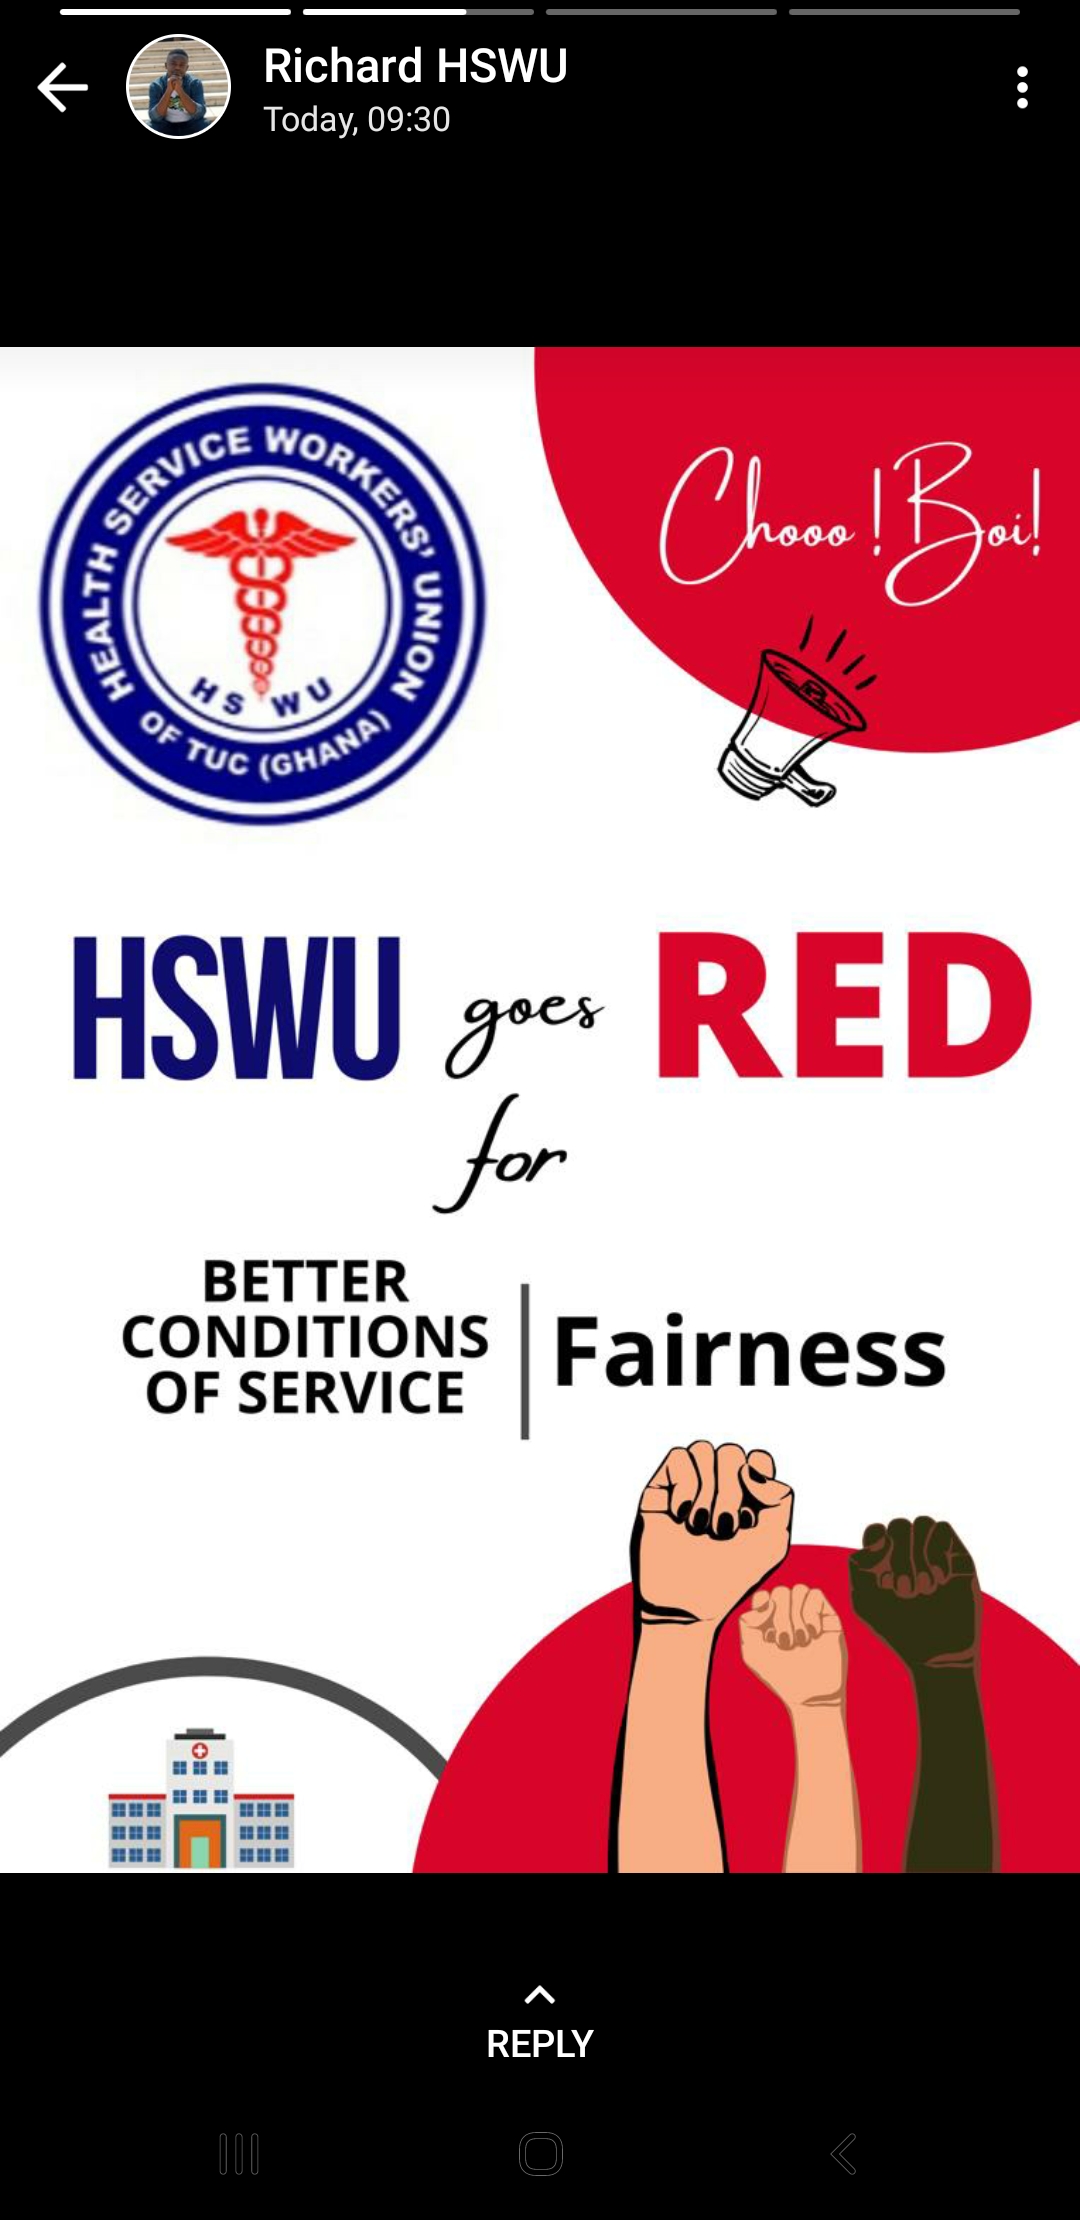 HSWU Goes Red